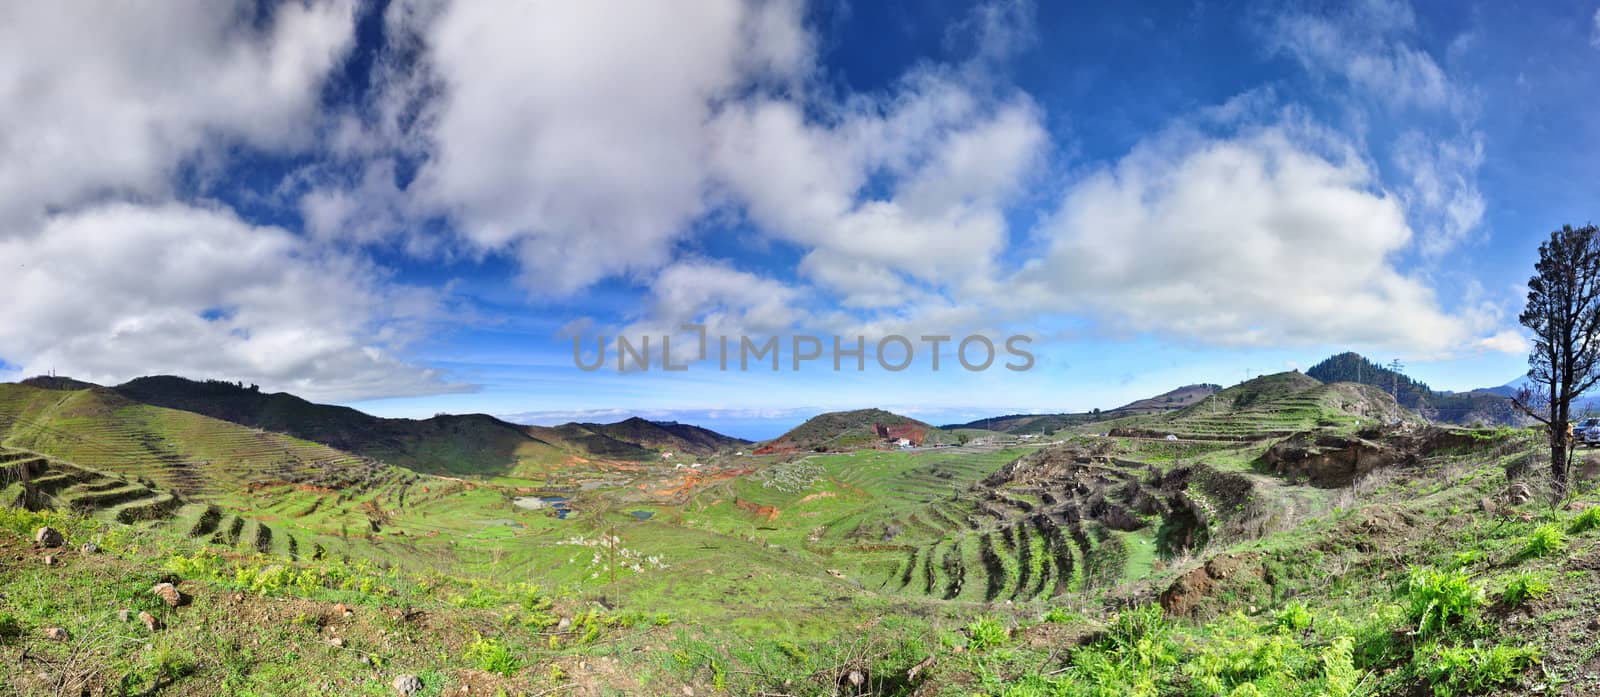 Green hills with blue sky on mountain plateau, Panorama in Tenerife, Canarian Islands